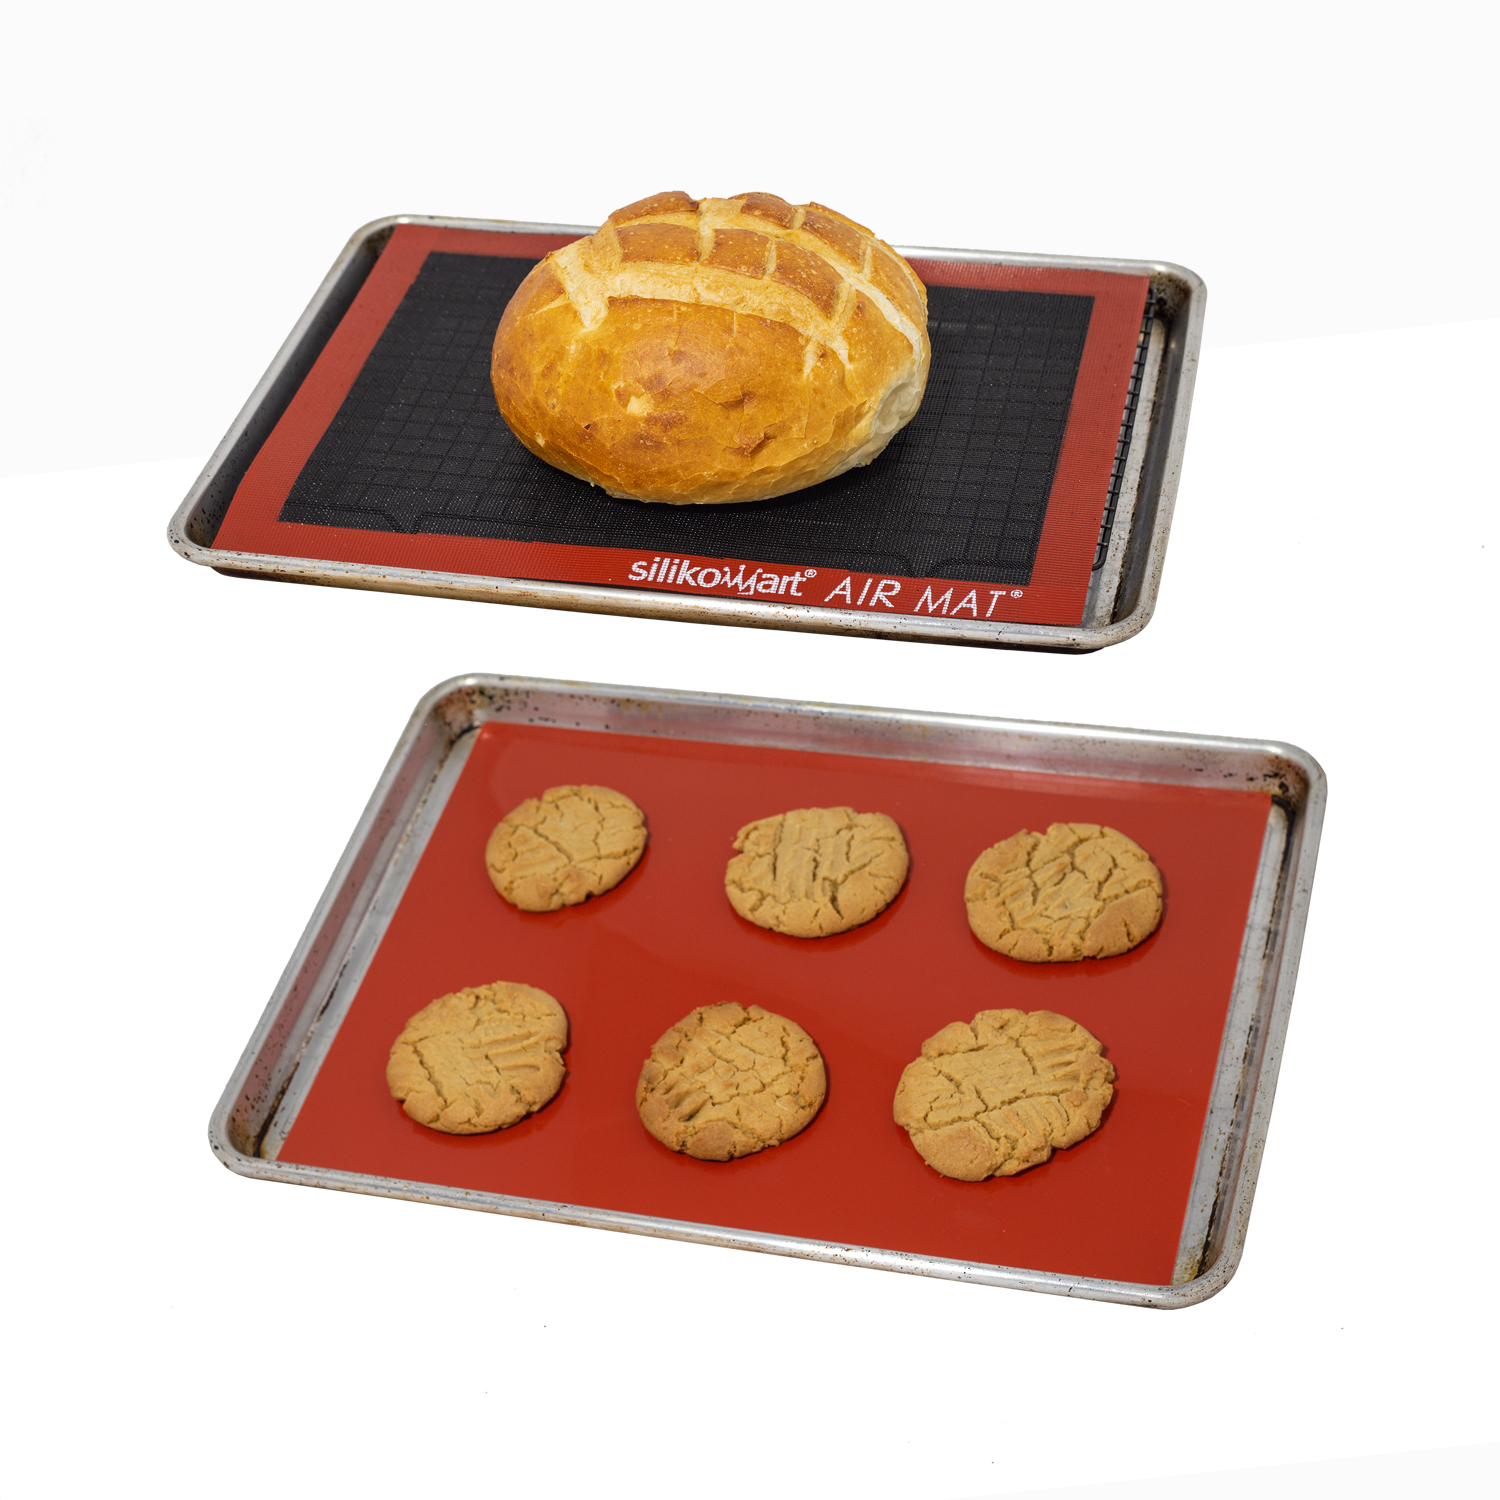 We love MMmat silicone baking mats, here's why